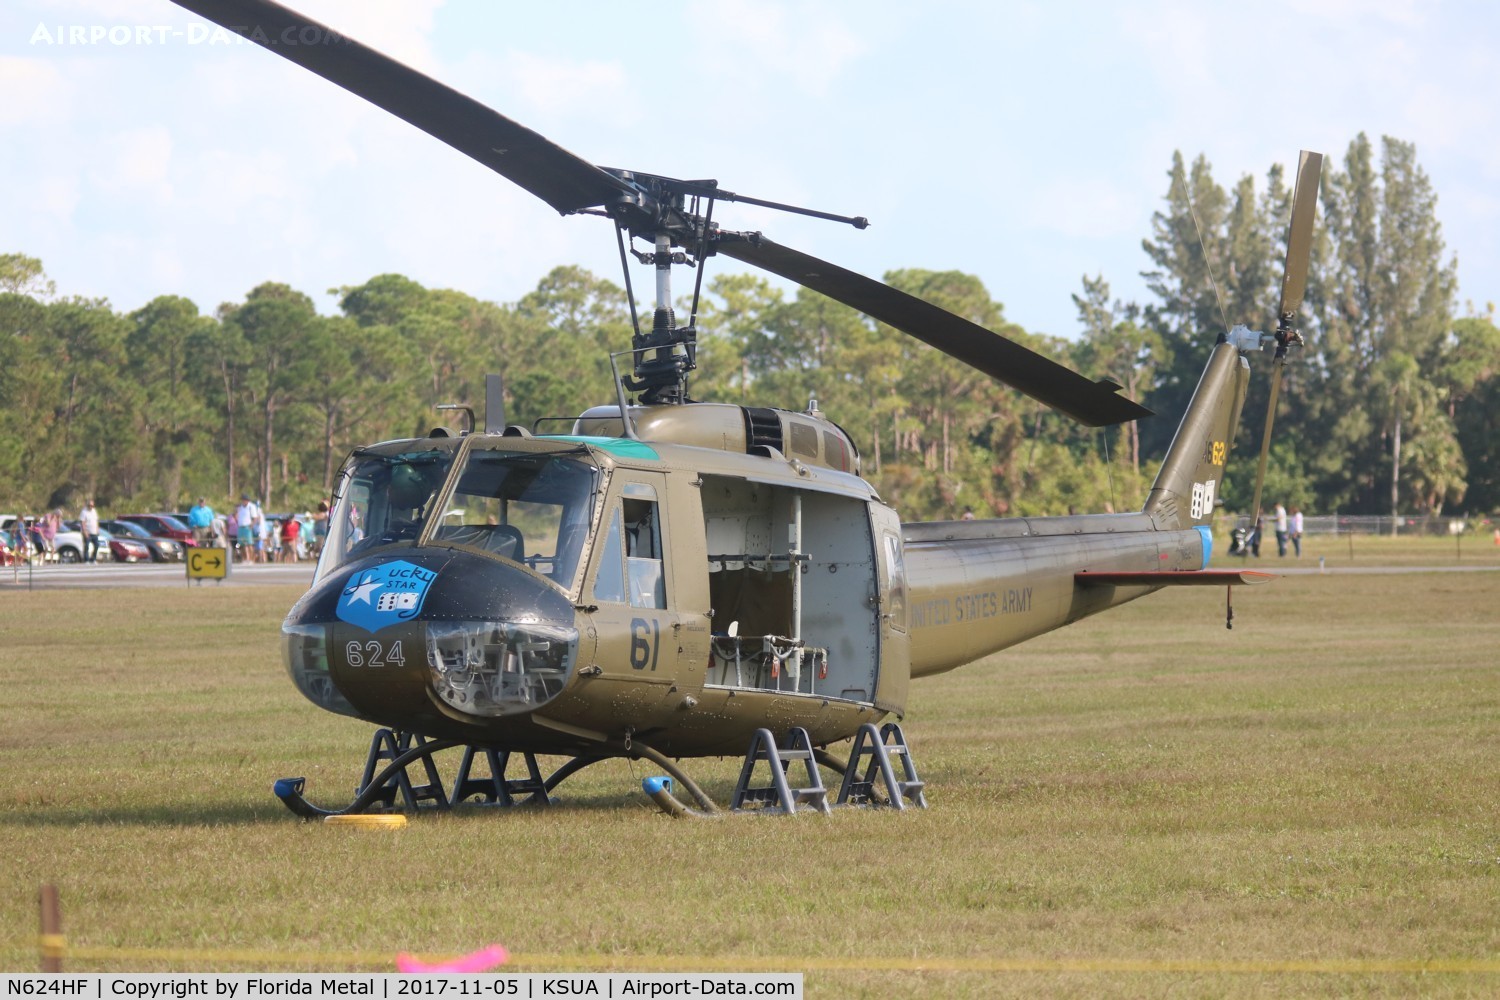 N624HF, 1966 Bell UH-1D Iroquois C/N 8819, UH-1 zx